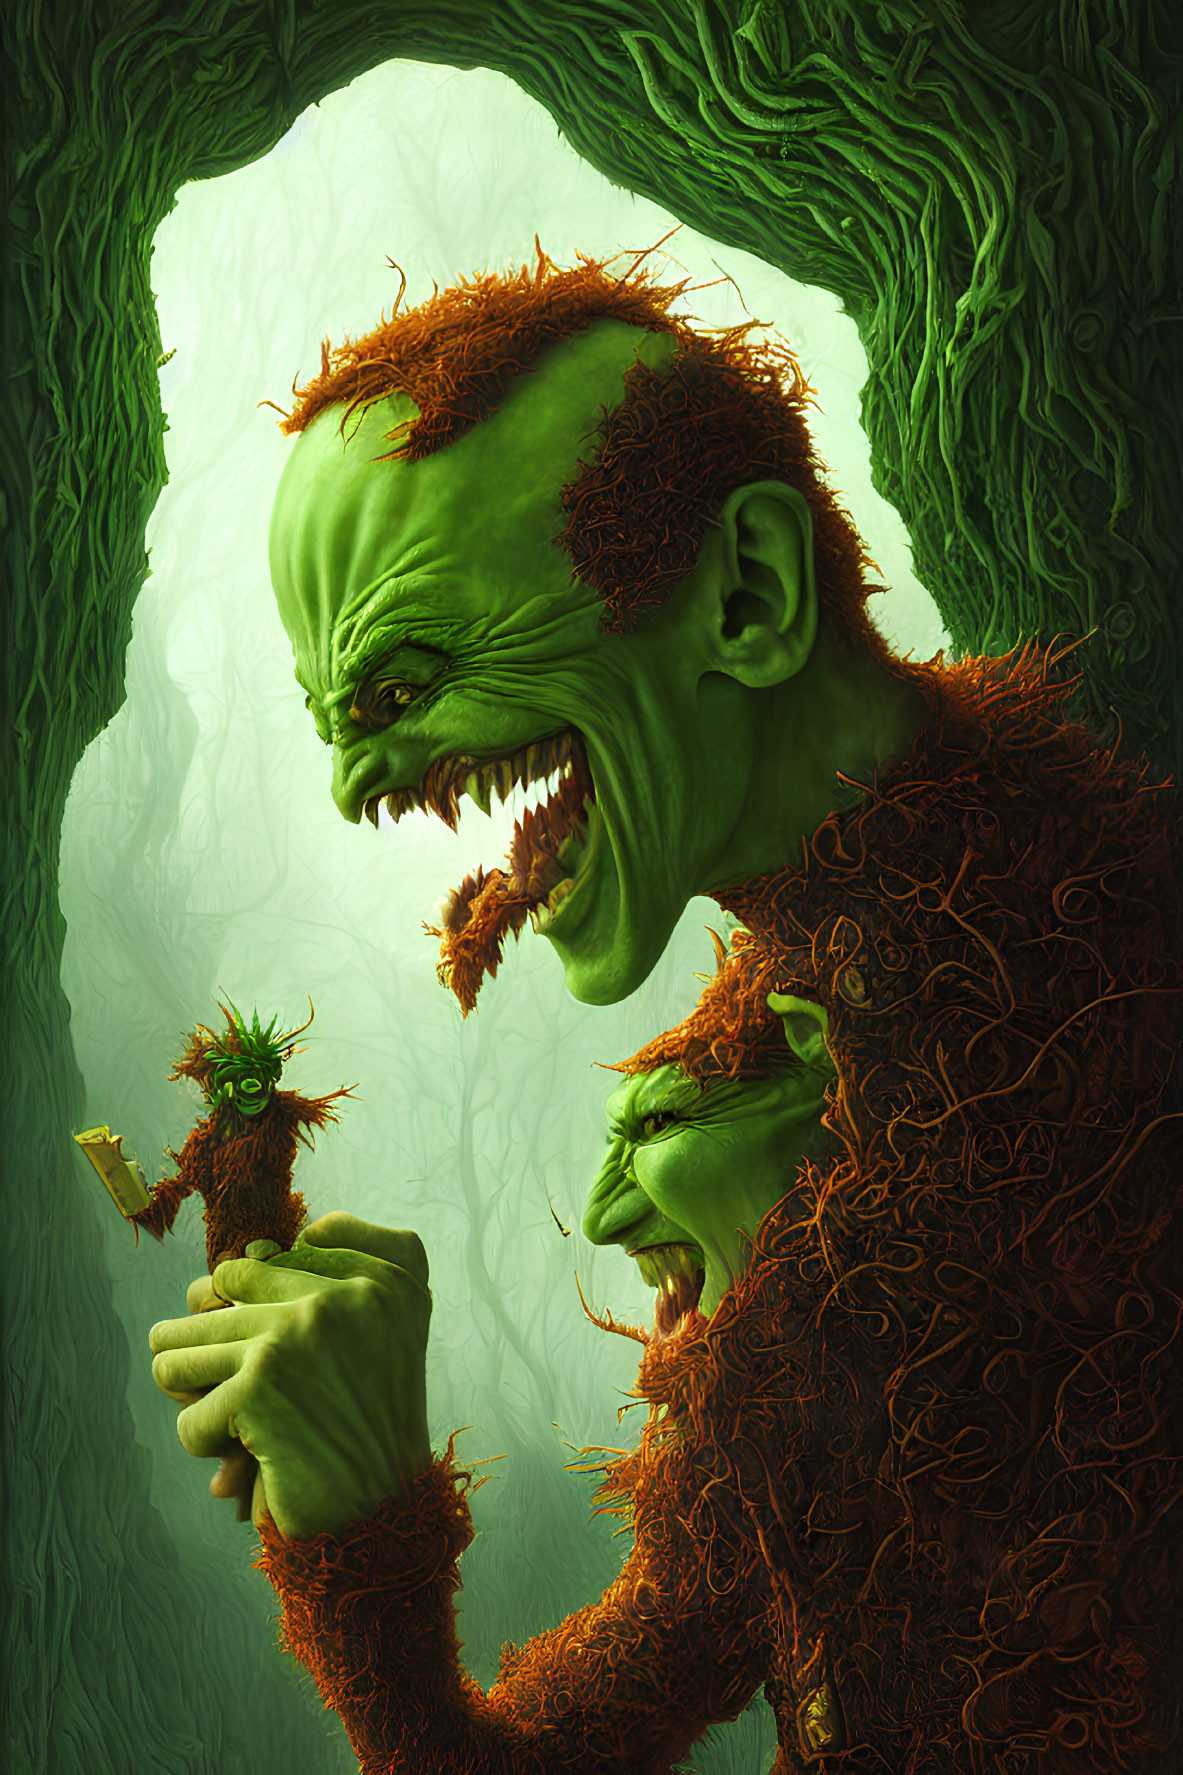 Menacing green creature with sharp teeth holding small creature in forest setting